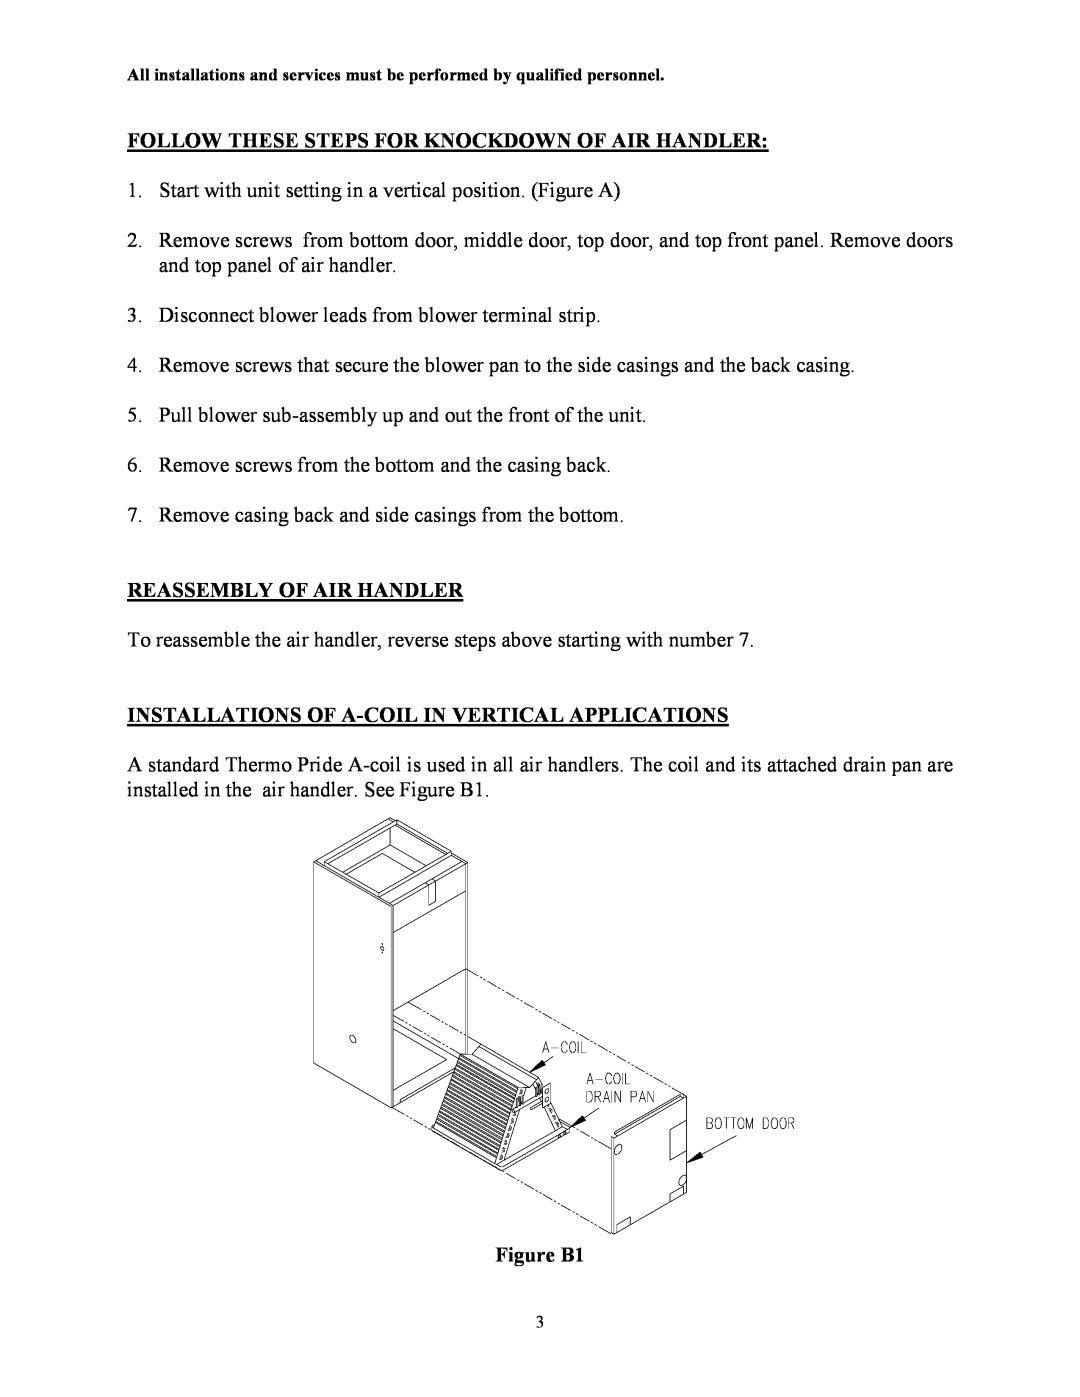 Thermo Products AH2-A, AH1-A Follow These Steps For Knockdown Of Air Handler, Reassembly Of Air Handler, Figure B1 